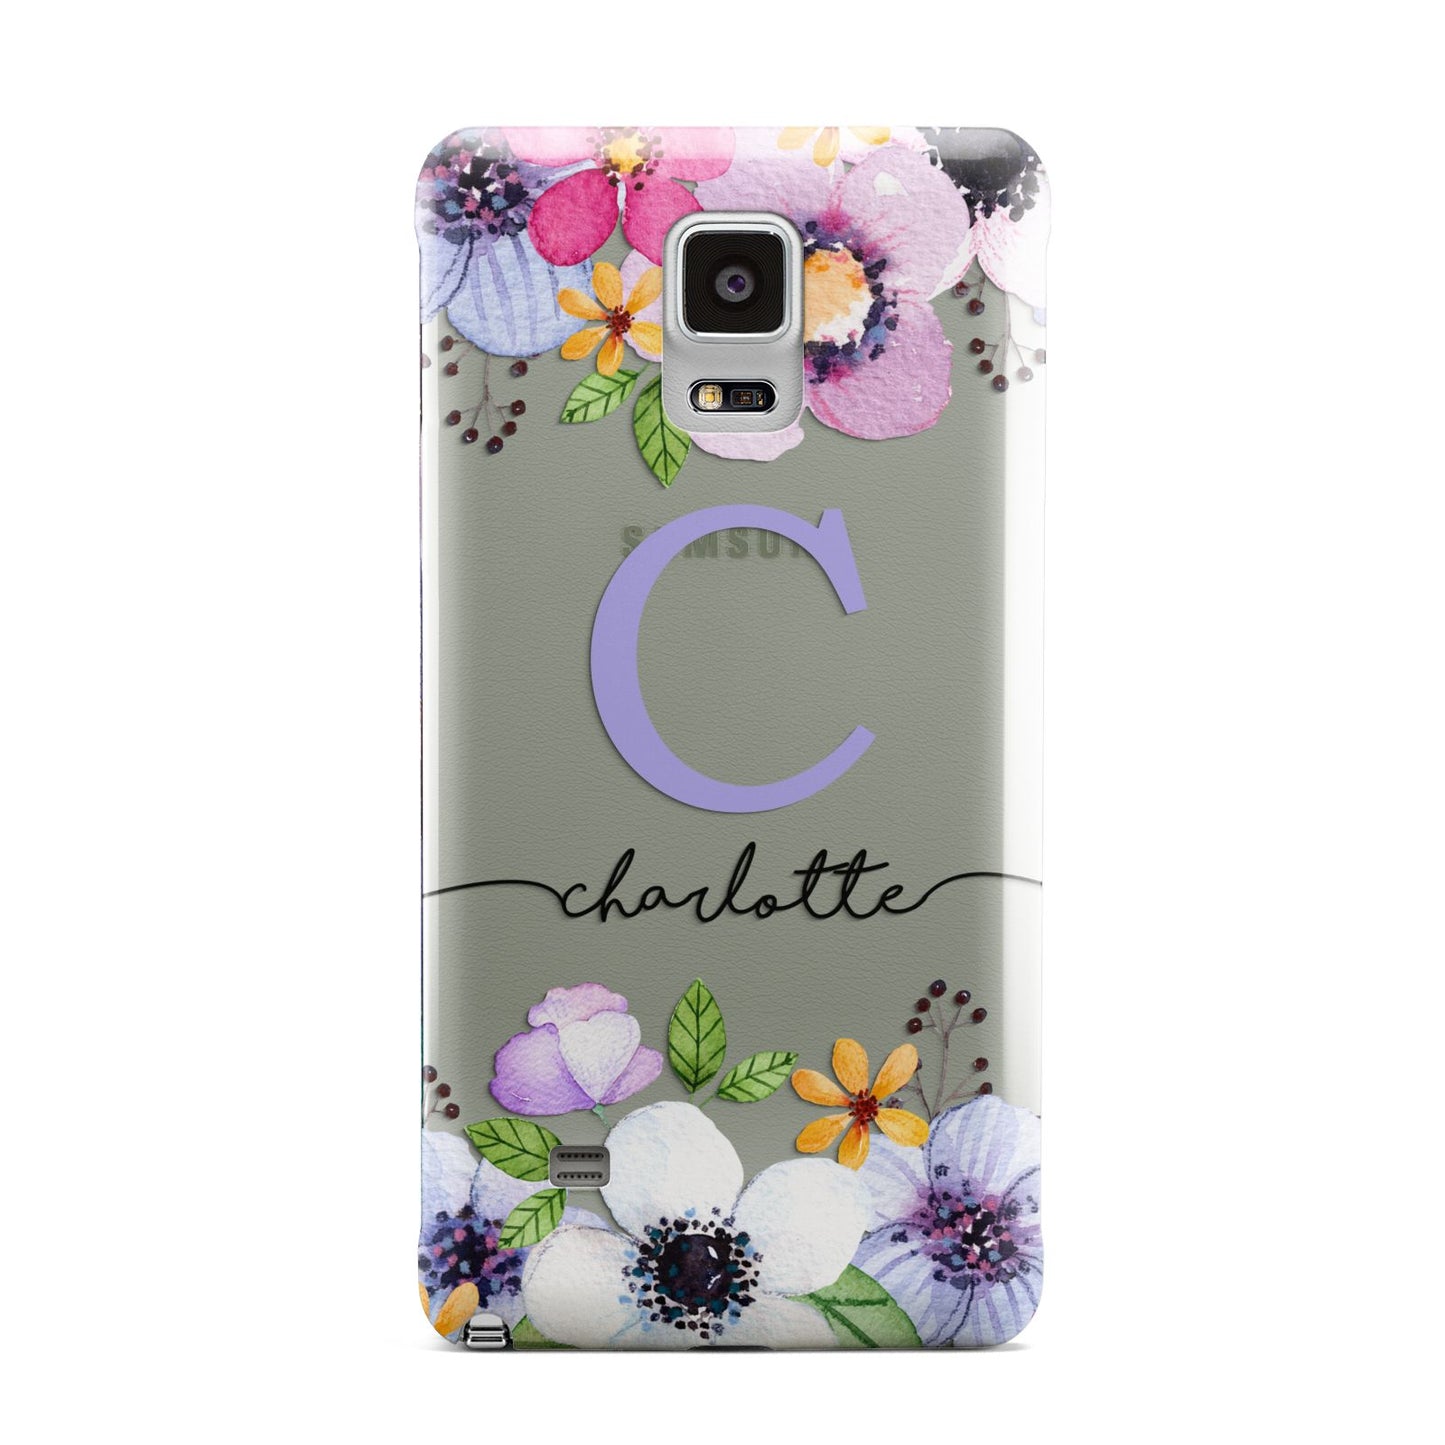 Personalised Violet Flowers Samsung Galaxy Note 4 Case